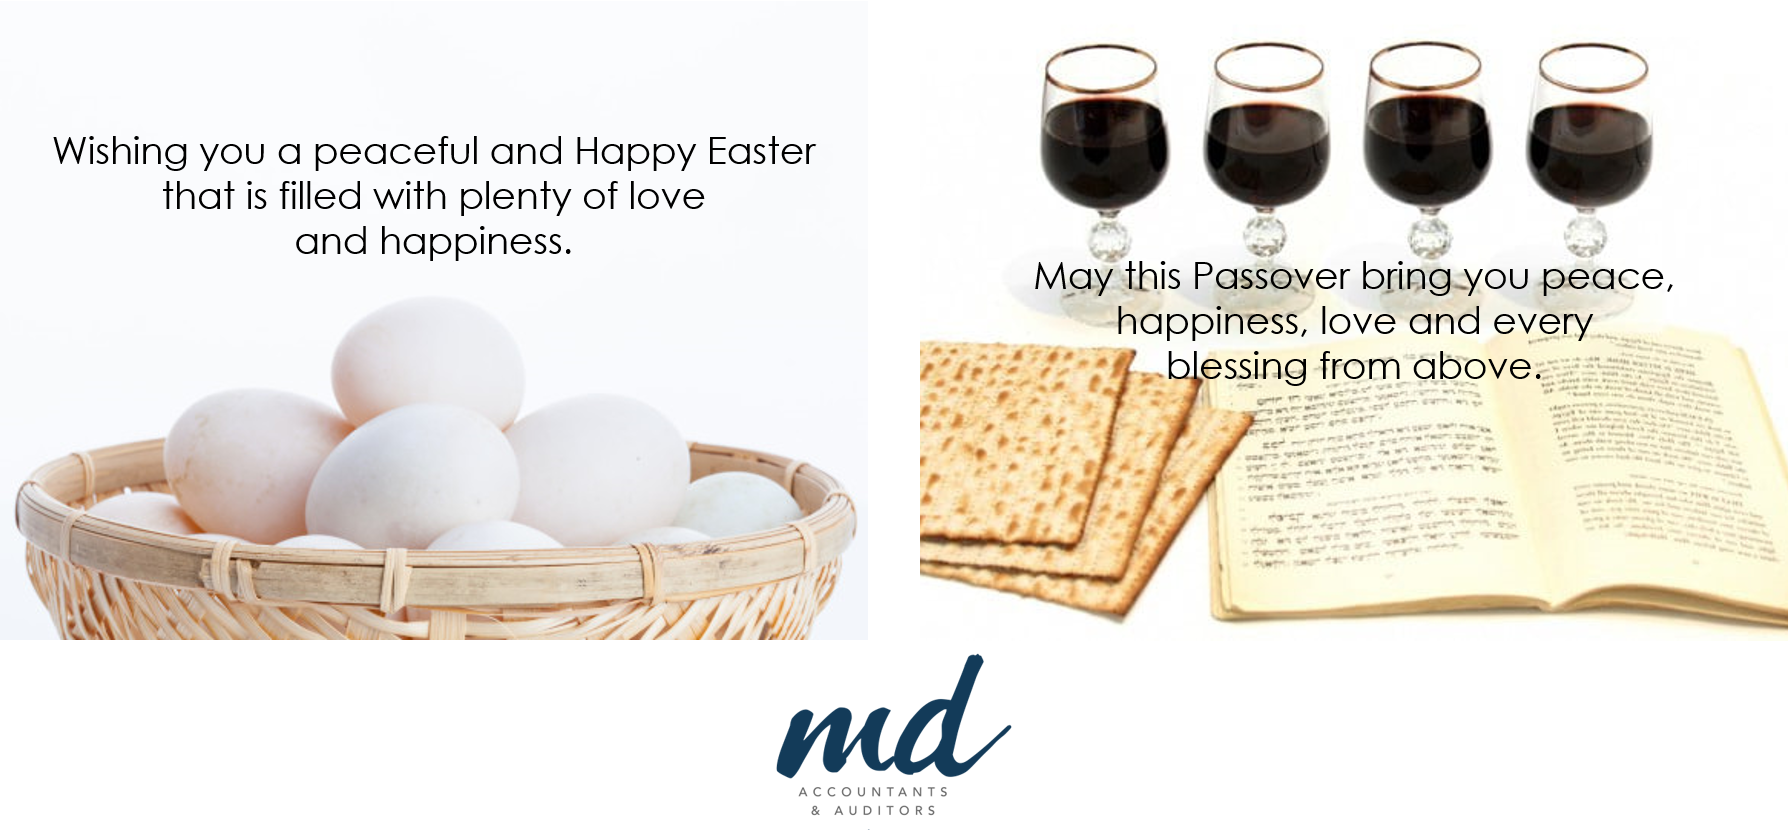 Easter and Passover Wishes | MD Accountants & Auditors Inc.